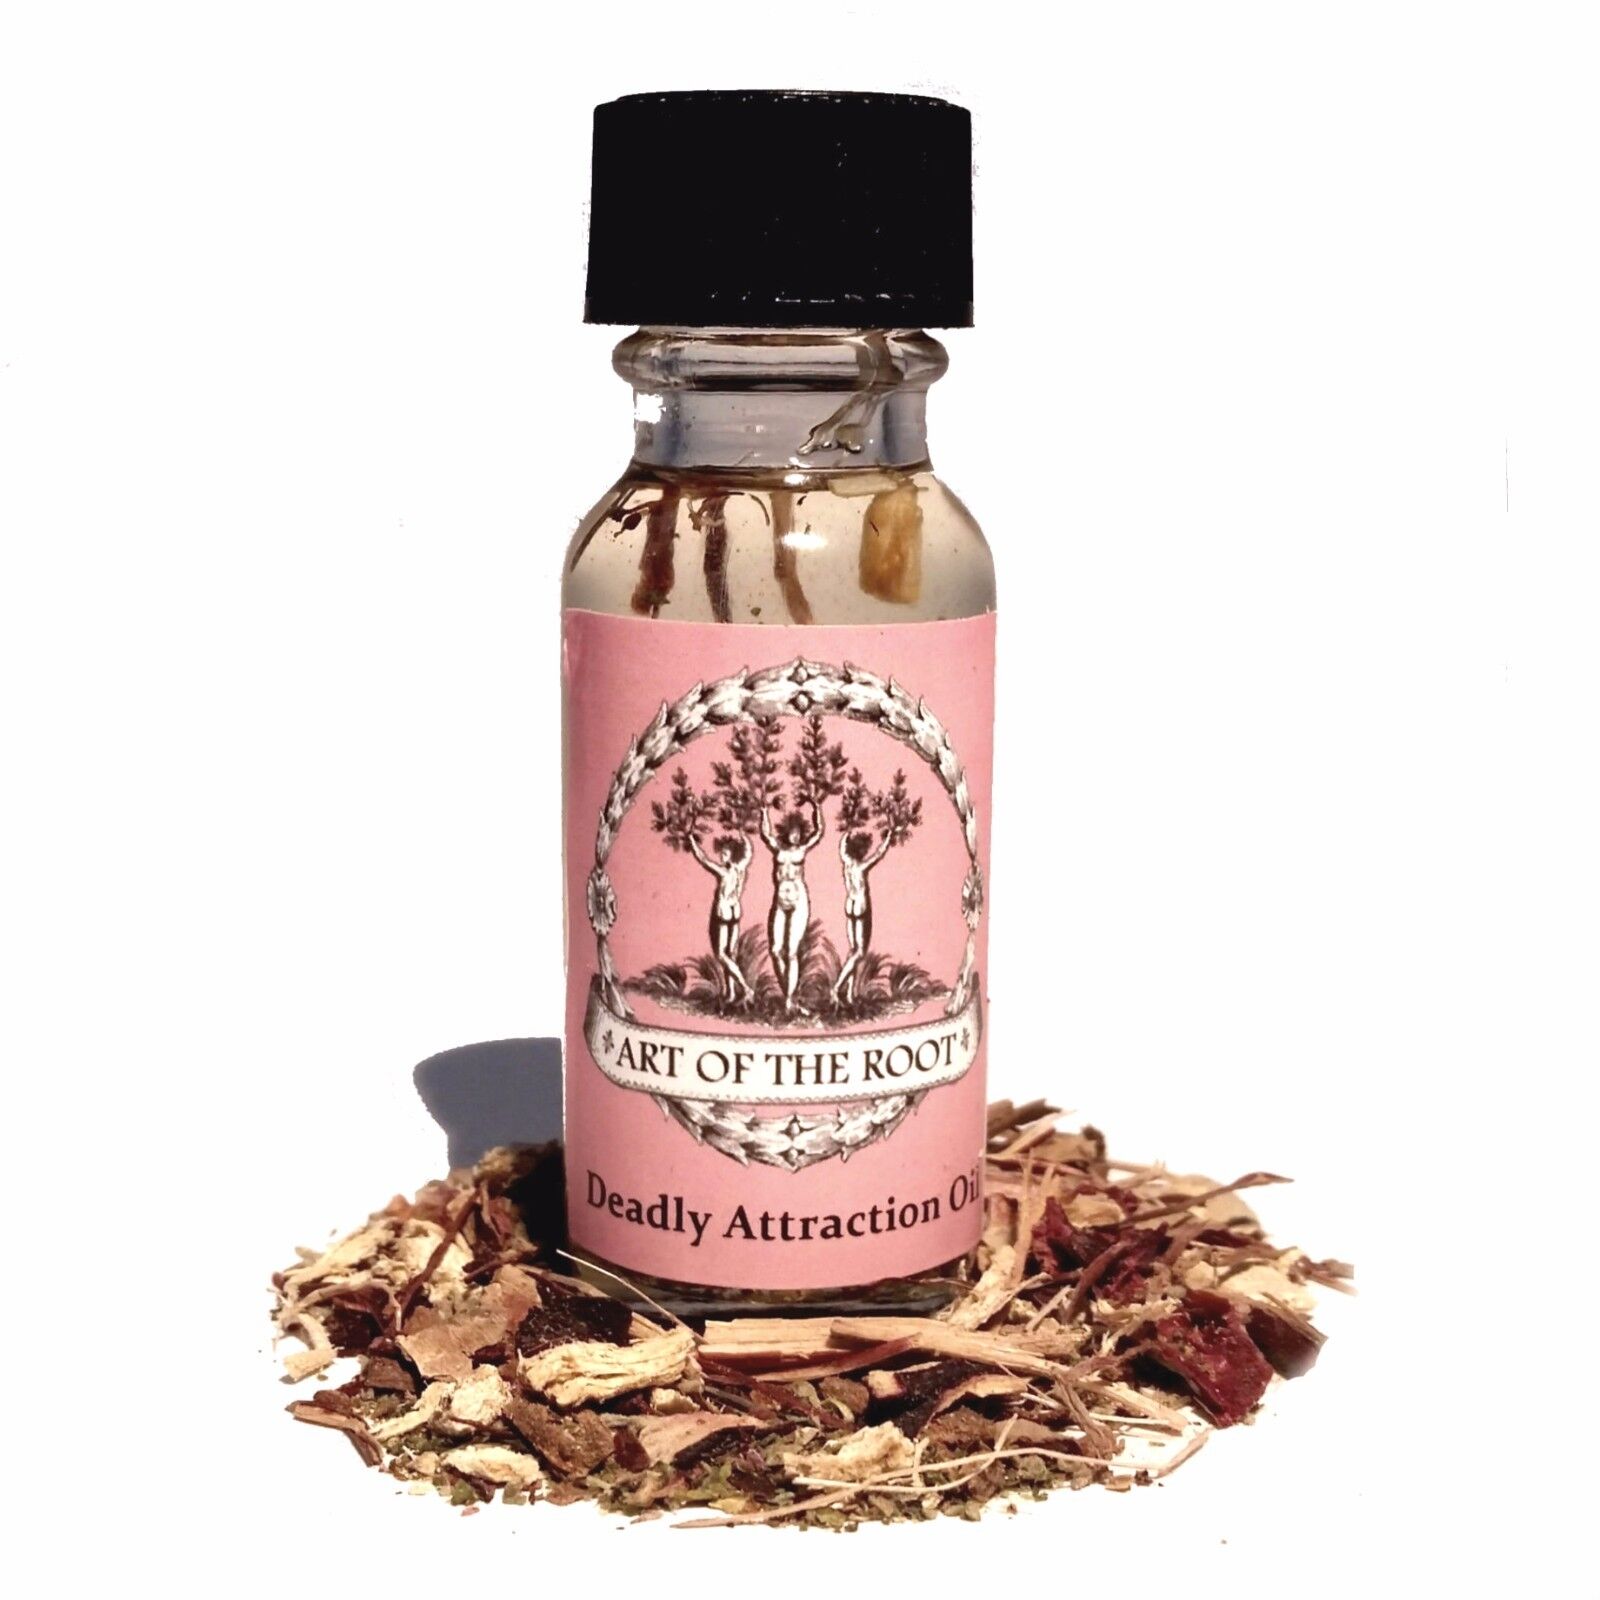 Deadly Attraction Oil Passion Seduction Love Lust Hoodoo Voodoo Wiccan Pagan 